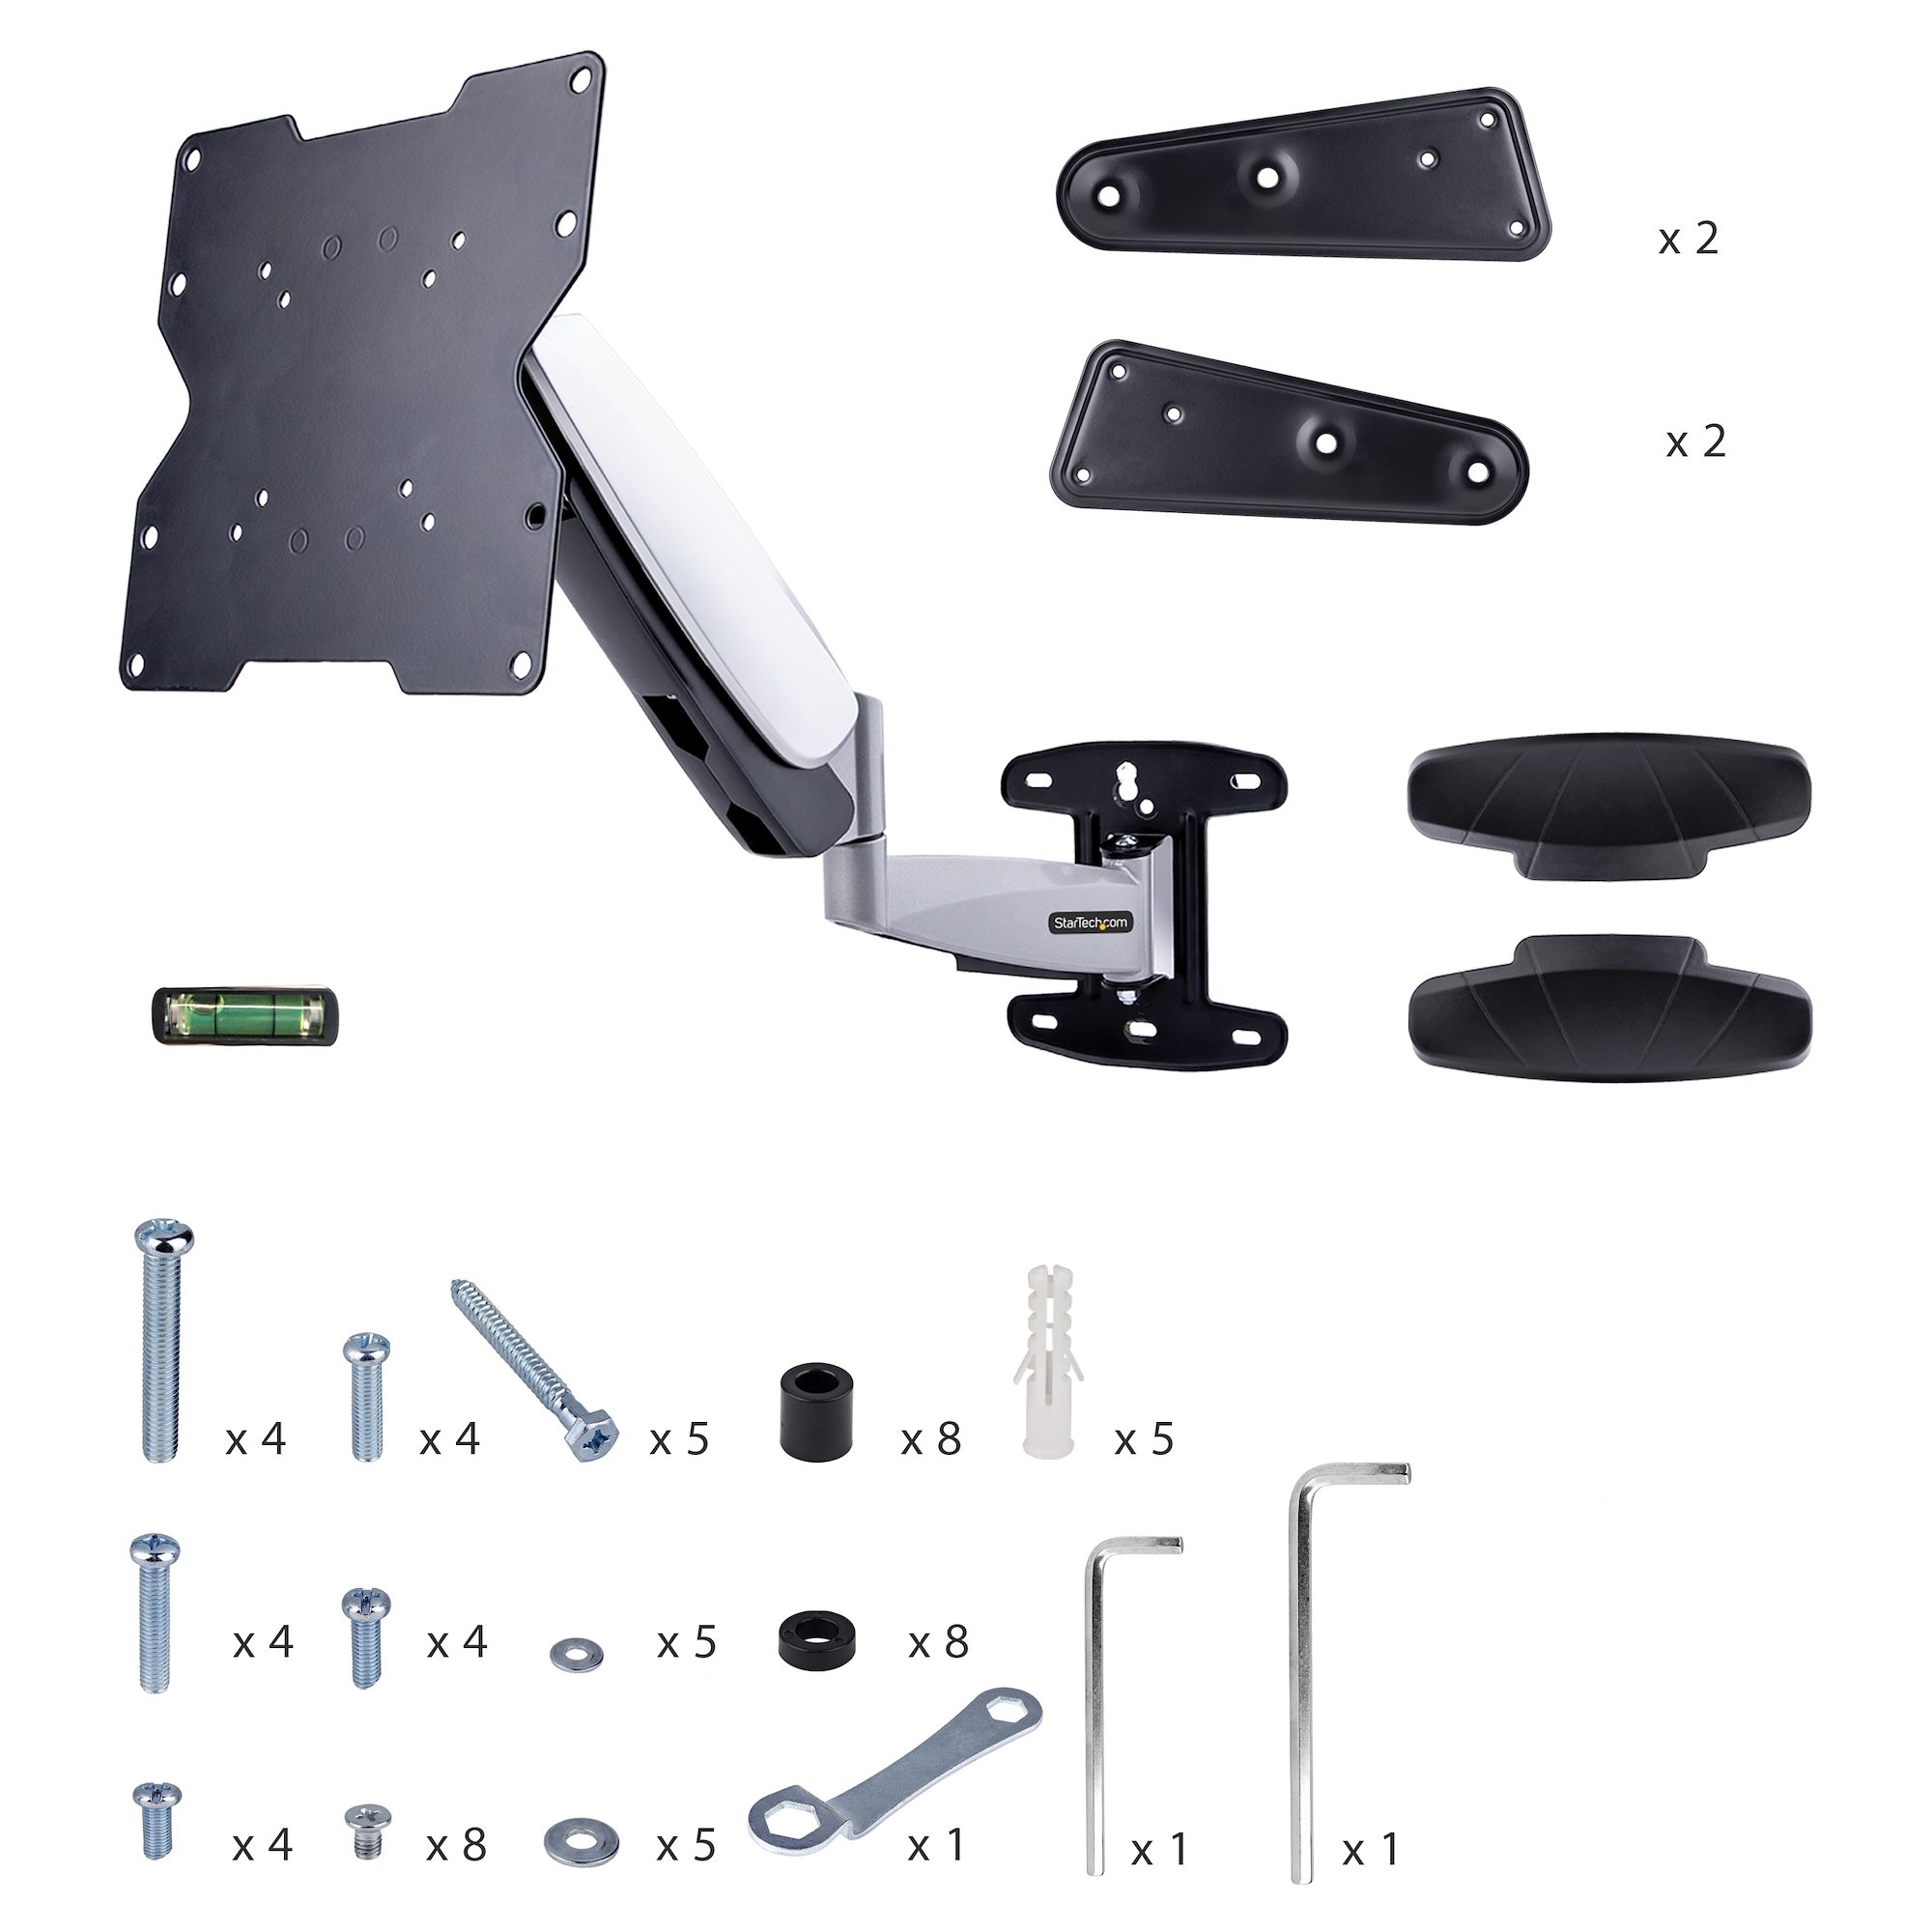 Mount Factory Full Motion TV Wall Mount Bracket for 32-52 Inch LED, LCD  Displays up to VESA 400x400. Universal Fit, Swivel, Tilt, with 10' HDMI  Cable